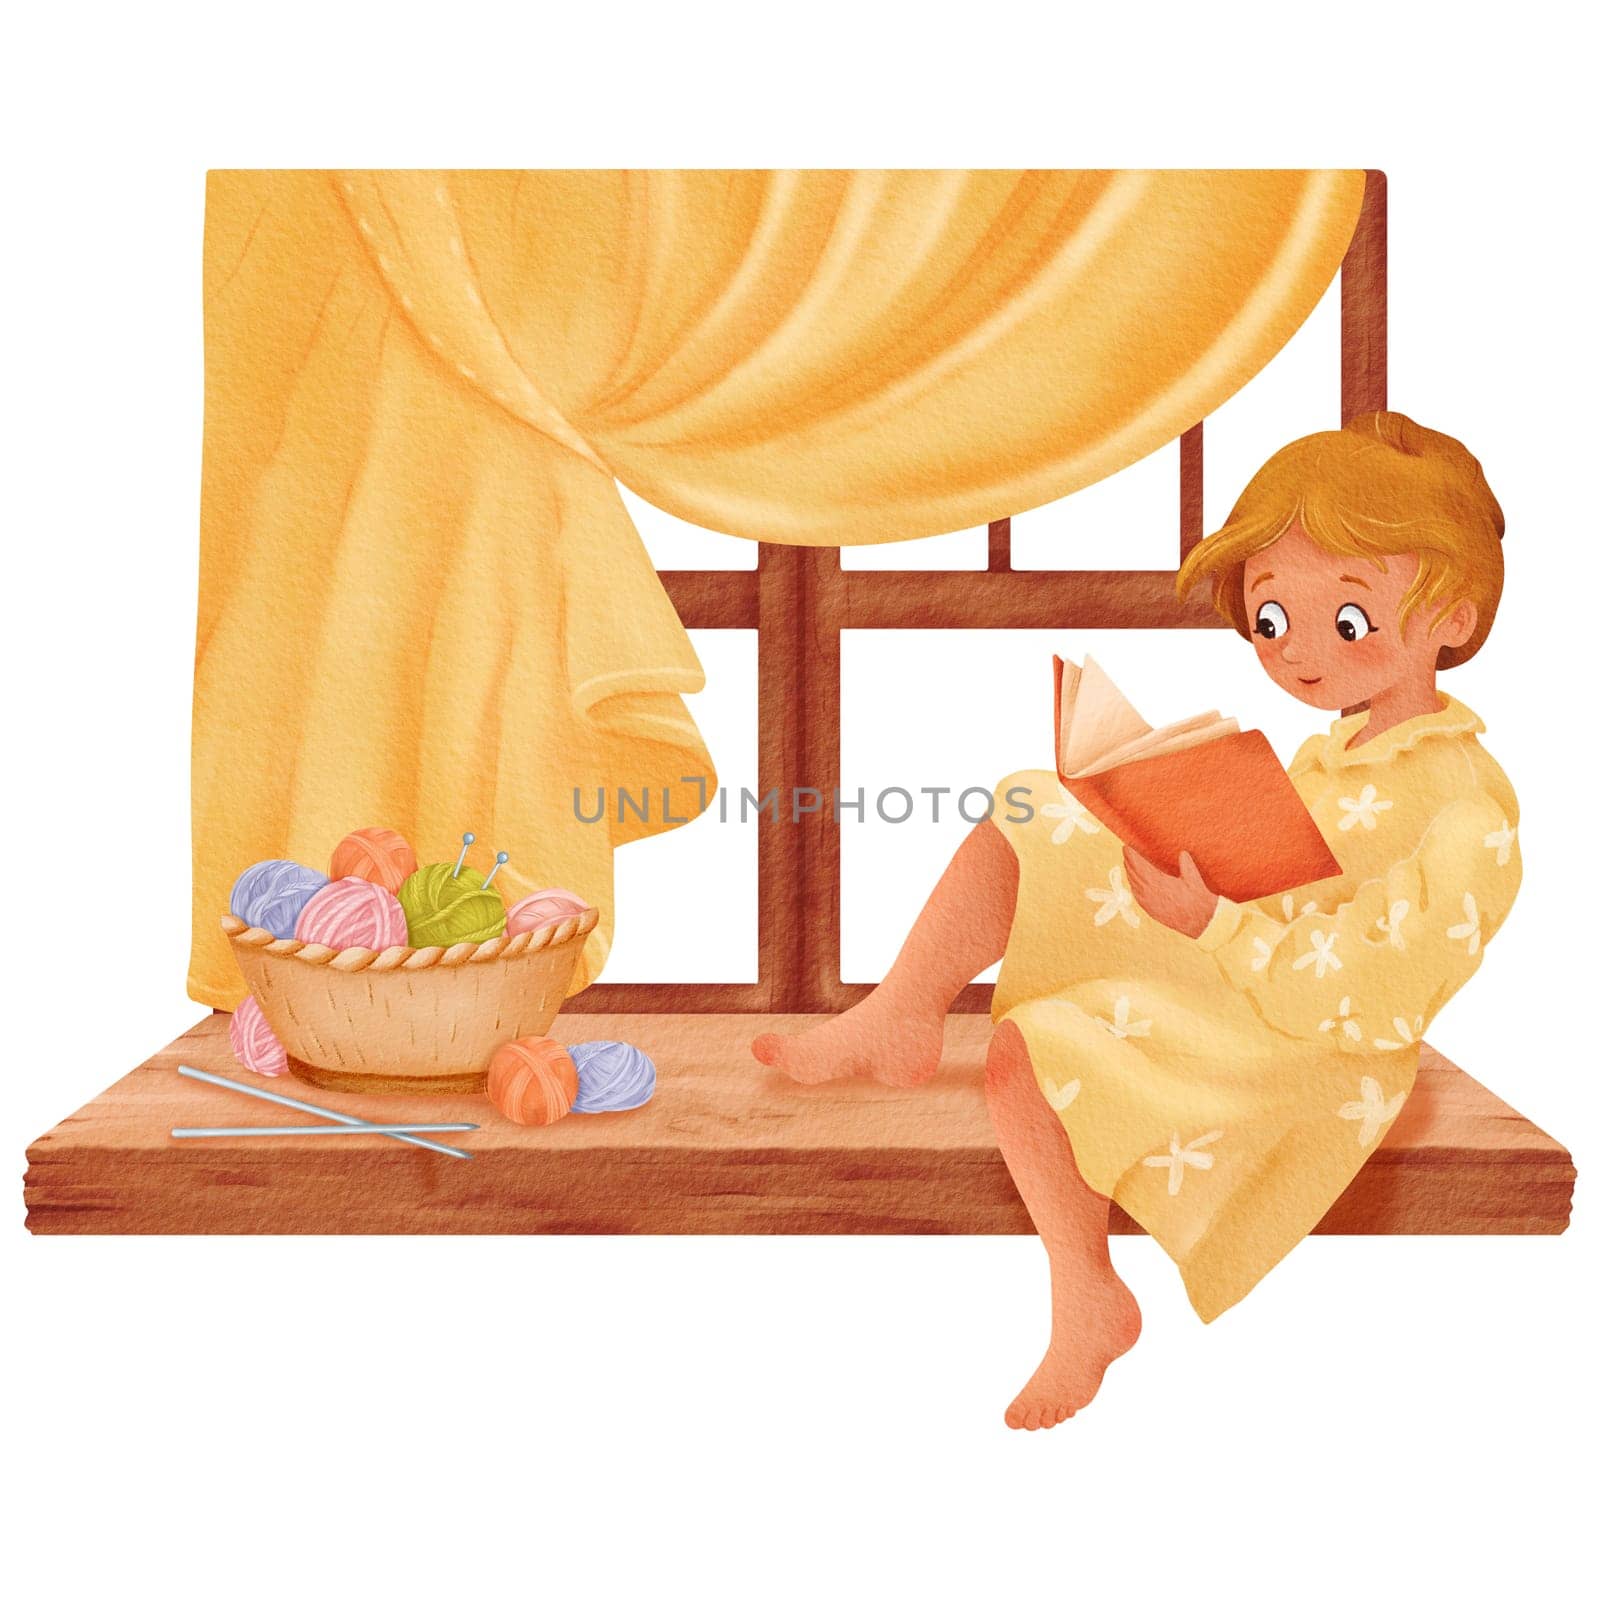 A composition portraying a girl seated by the window against a backdrop of satin curtains, a knitting book. A basket with multicolored yarn skeins on a wooden windowsill. Watercolor illustration by Art_Mari_Ka